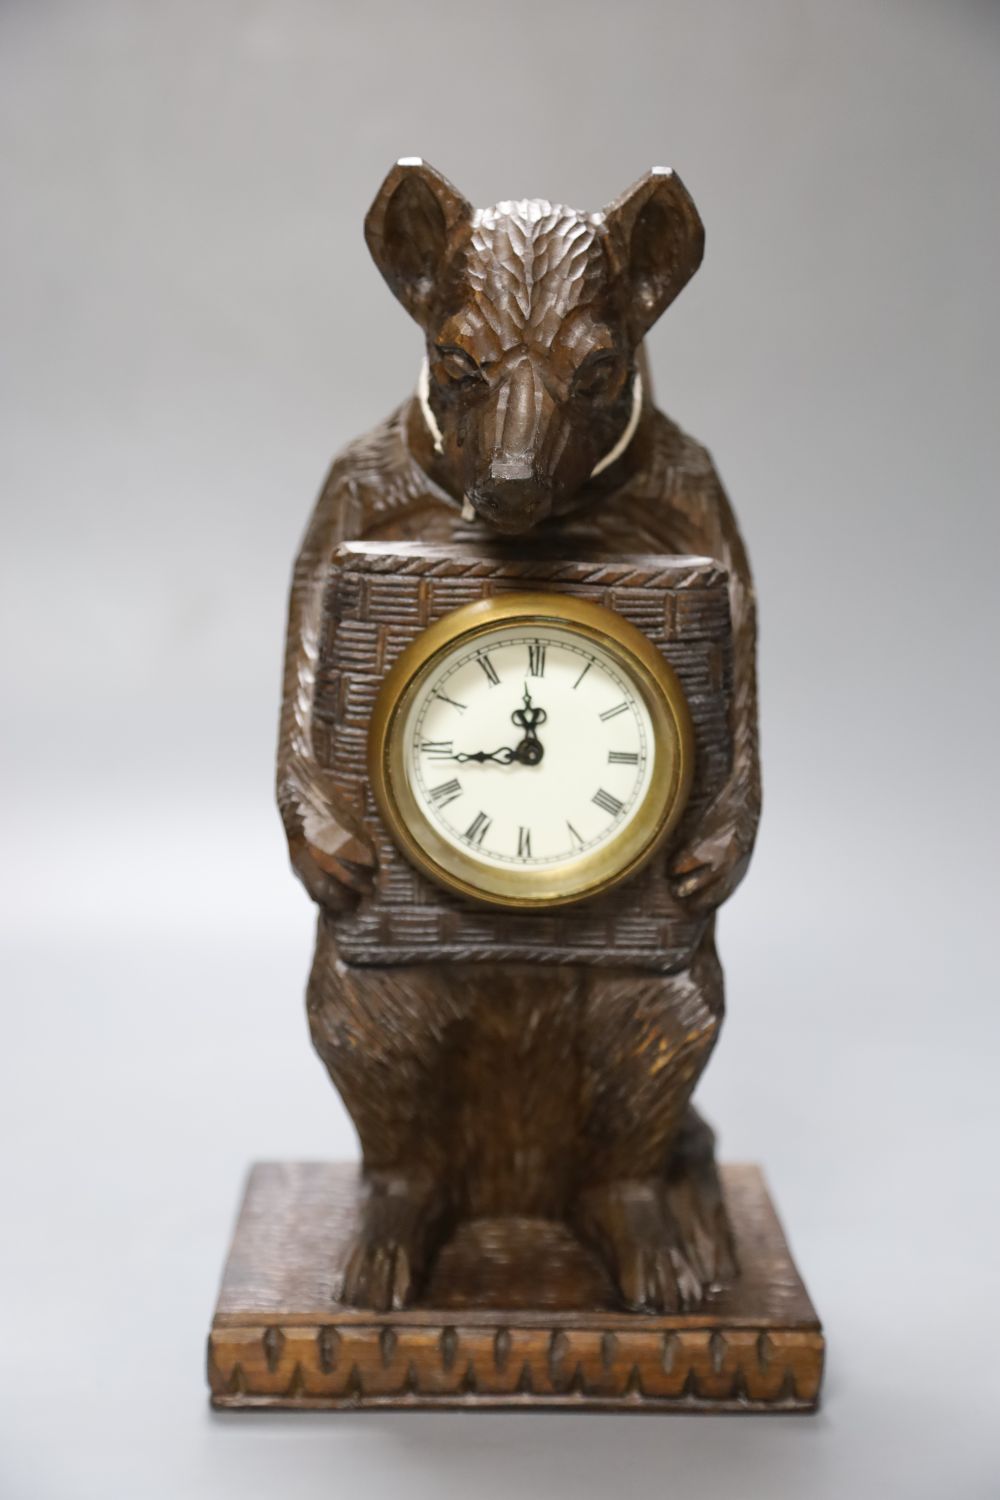 A modern carved pine bear timepiece in Black Forest style, 13cmCONDITION: Good condition